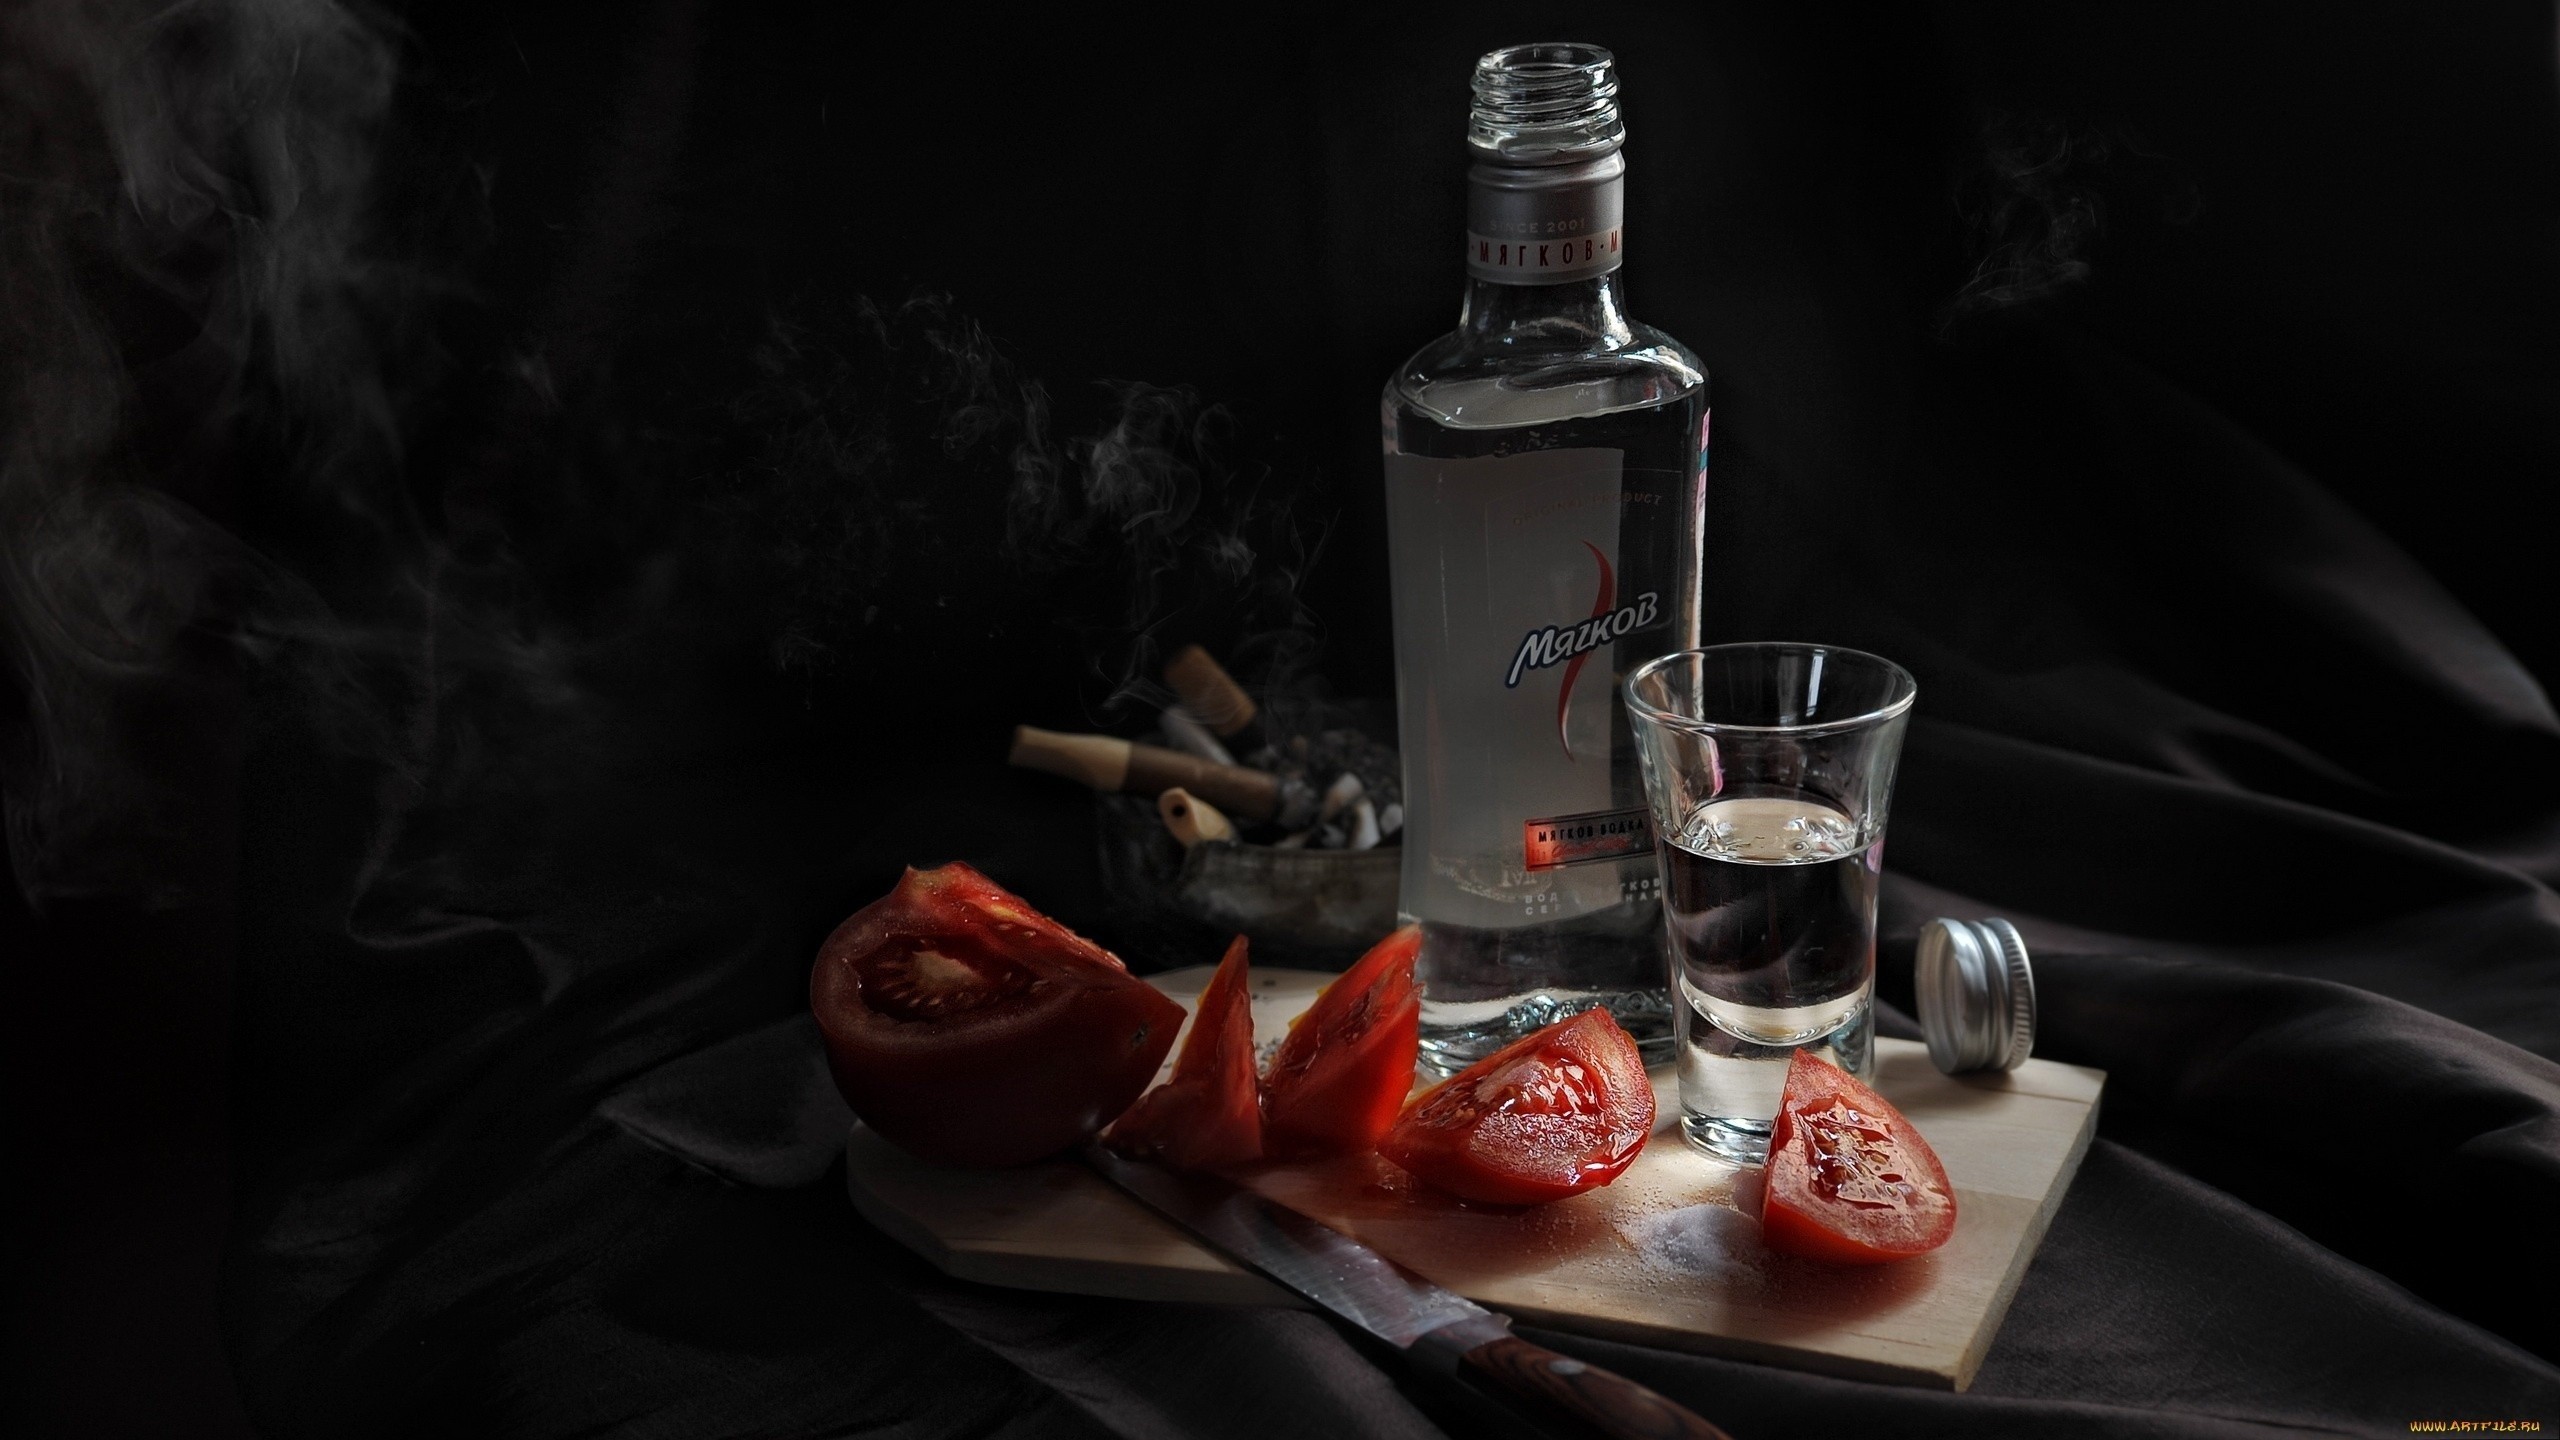 General 2560x1440 lunch alcohol tomatoes knife bottles food vegetables vodka cutting board Russian low light Russia